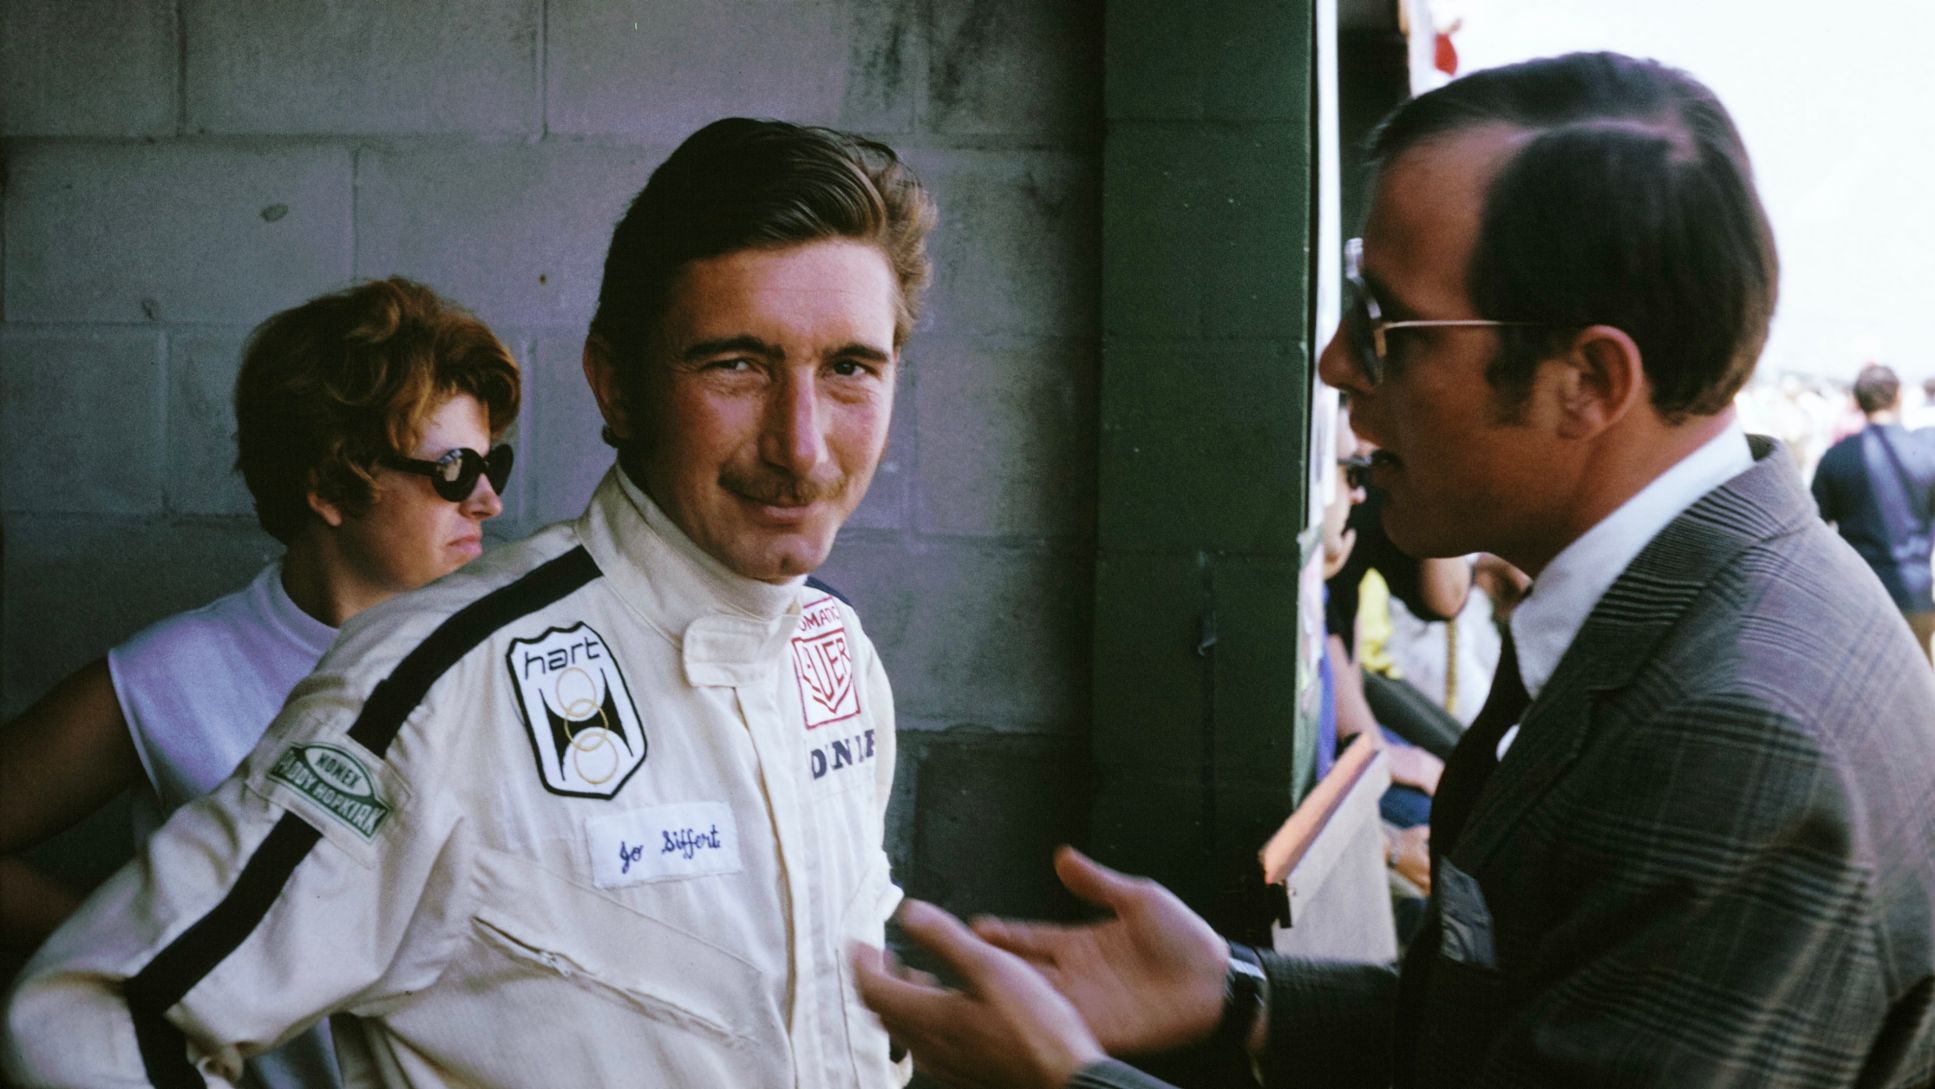 Sebring, March 12, 1969, Jo Siffert in the middle, Rico Steinemann on the left, Mrs. Mitter in the background.